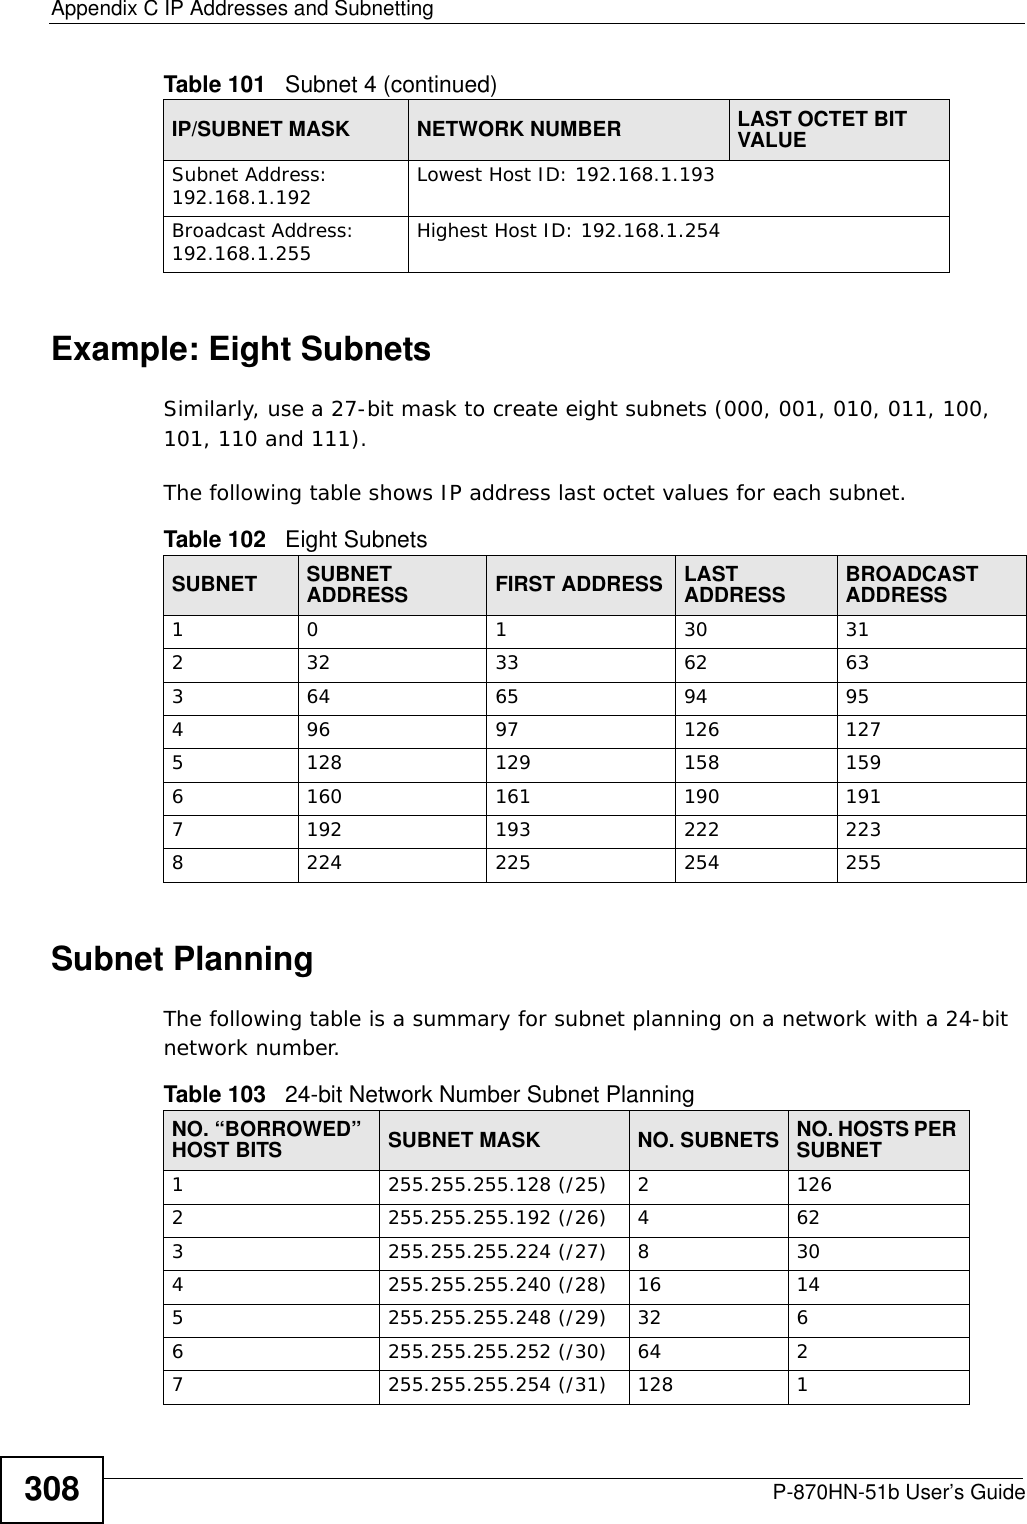 Appendix C IP Addresses and SubnettingP-870HN-51b User’s Guide308Example: Eight SubnetsSimilarly, use a 27-bit mask to create eight subnets (000, 001, 010, 011, 100, 101, 110 and 111). The following table shows IP address last octet values for each subnet.Subnet PlanningThe following table is a summary for subnet planning on a network with a 24-bit network number.Subnet Address: 192.168.1.192 Lowest Host ID: 192.168.1.193Broadcast Address: 192.168.1.255 Highest Host ID: 192.168.1.254Table 101   Subnet 4 (continued)IP/SUBNET MASK NETWORK NUMBER LAST OCTET BIT VALUETable 102   Eight SubnetsSUBNET SUBNET ADDRESS FIRST ADDRESS LAST ADDRESS BROADCAST ADDRESS1 0 1 30 31232 33 62 63364 65 94 95496 97 126 1275128 129 158 1596160 161 190 1917192 193 222 2238224 225 254 255Table 103   24-bit Network Number Subnet PlanningNO. “BORROWED” HOST BITS SUBNET MASK NO. SUBNETS NO. HOSTS PER SUBNET1255.255.255.128 (/25) 21262255.255.255.192 (/26) 4623255.255.255.224 (/27) 8304255.255.255.240 (/28) 16 145255.255.255.248 (/29) 32 66255.255.255.252 (/30) 64 27255.255.255.254 (/31) 128 1